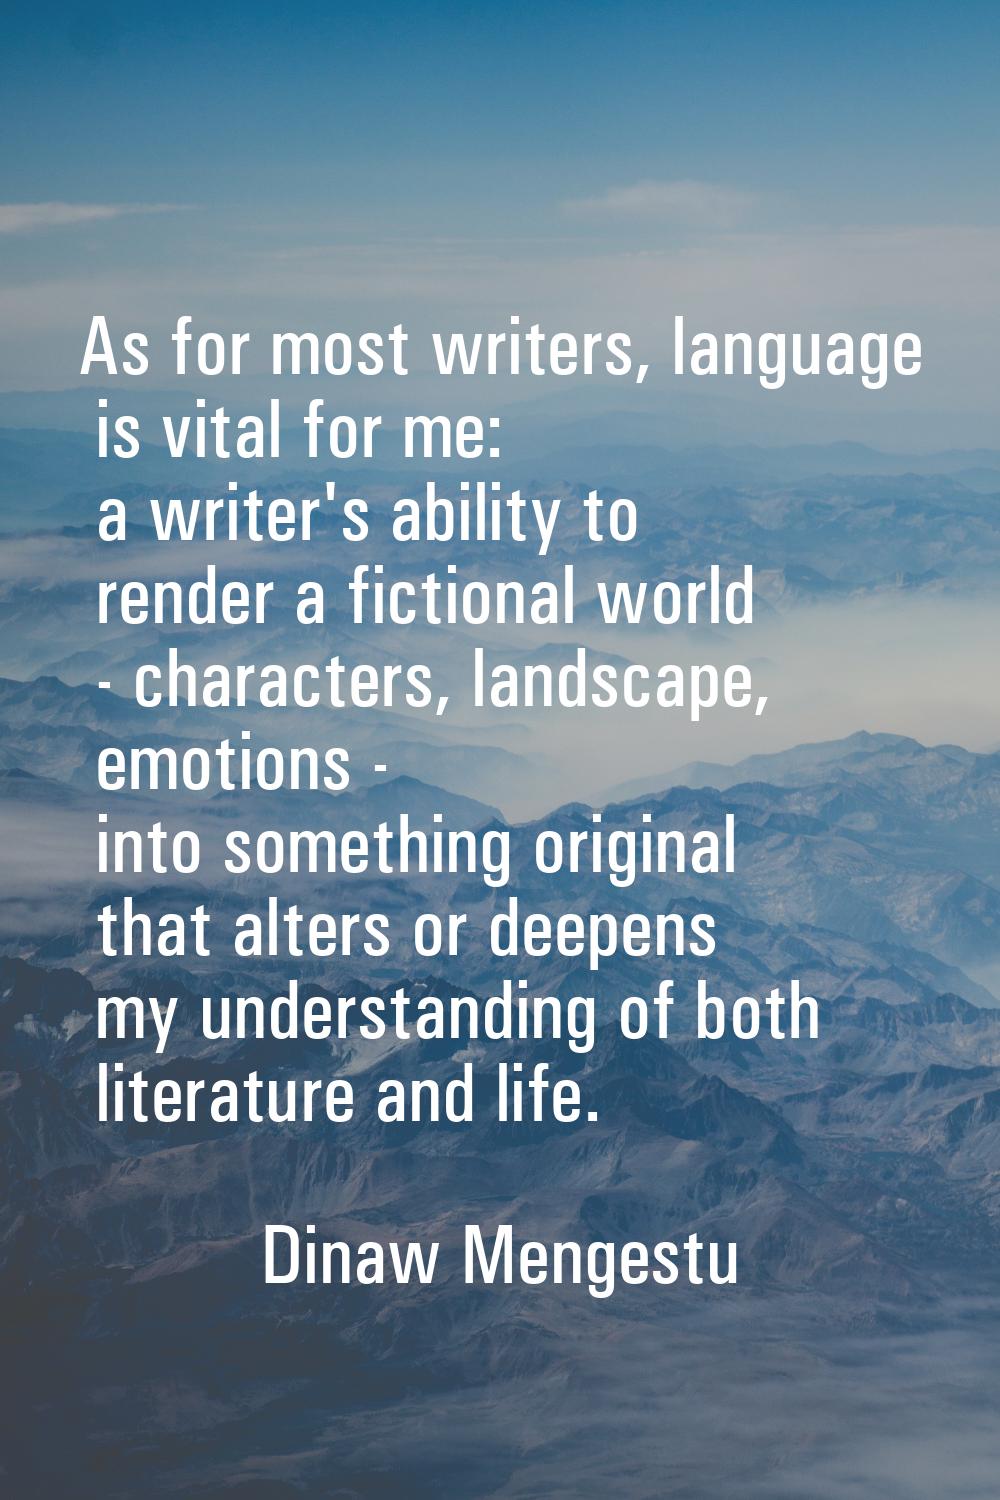 As for most writers, language is vital for me: a writer's ability to render a fictional world - cha